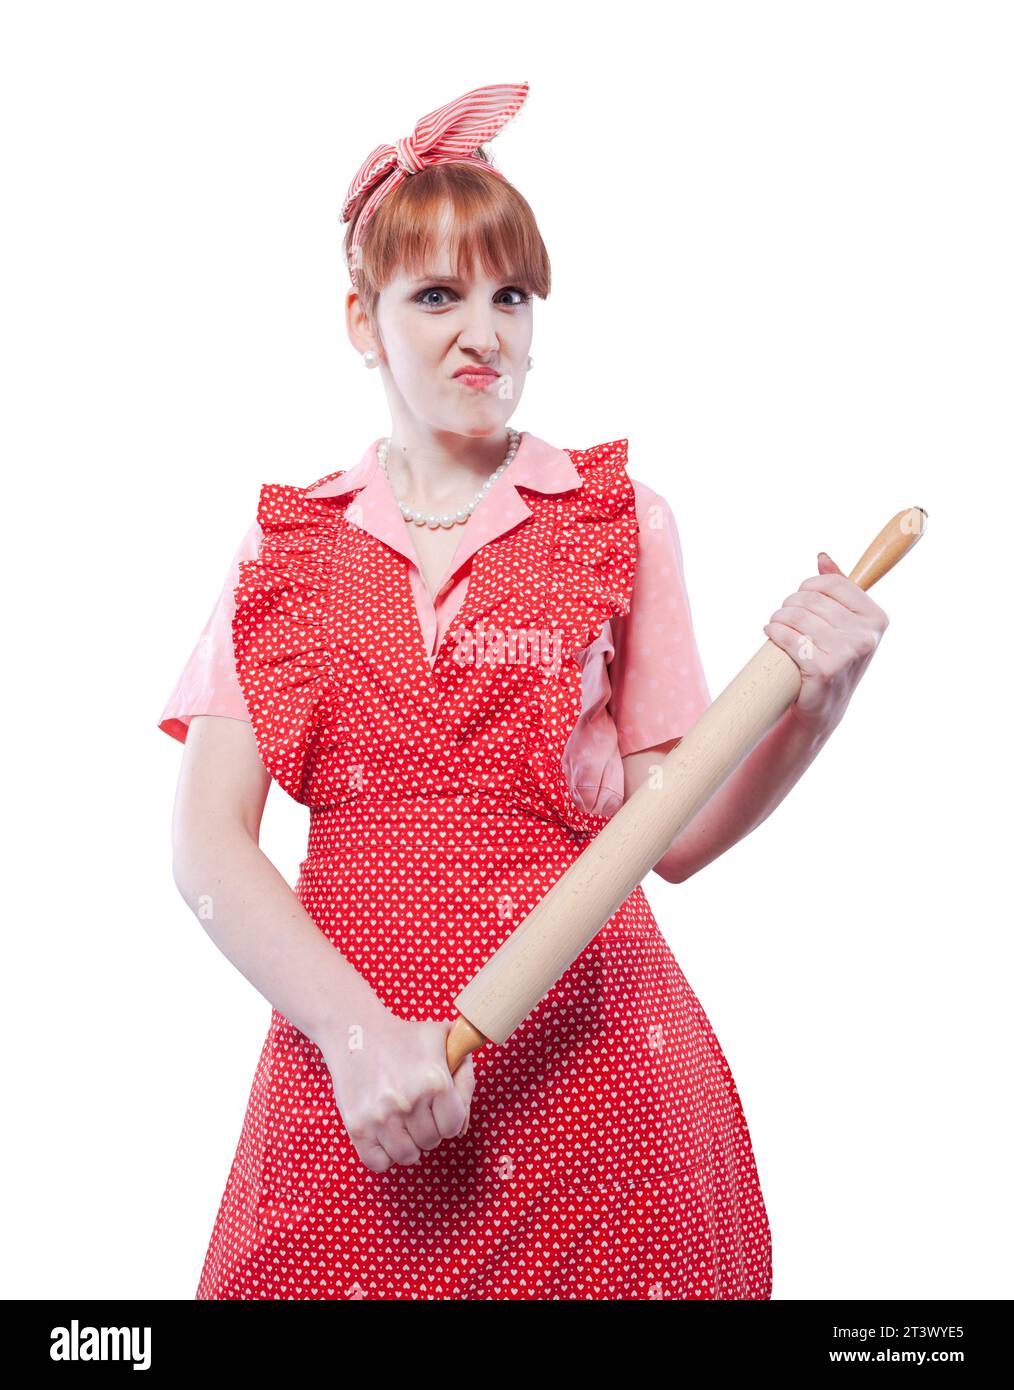 Aggressive angry vintage style housewife holding a rolling pin and looking at camera Stock Photo